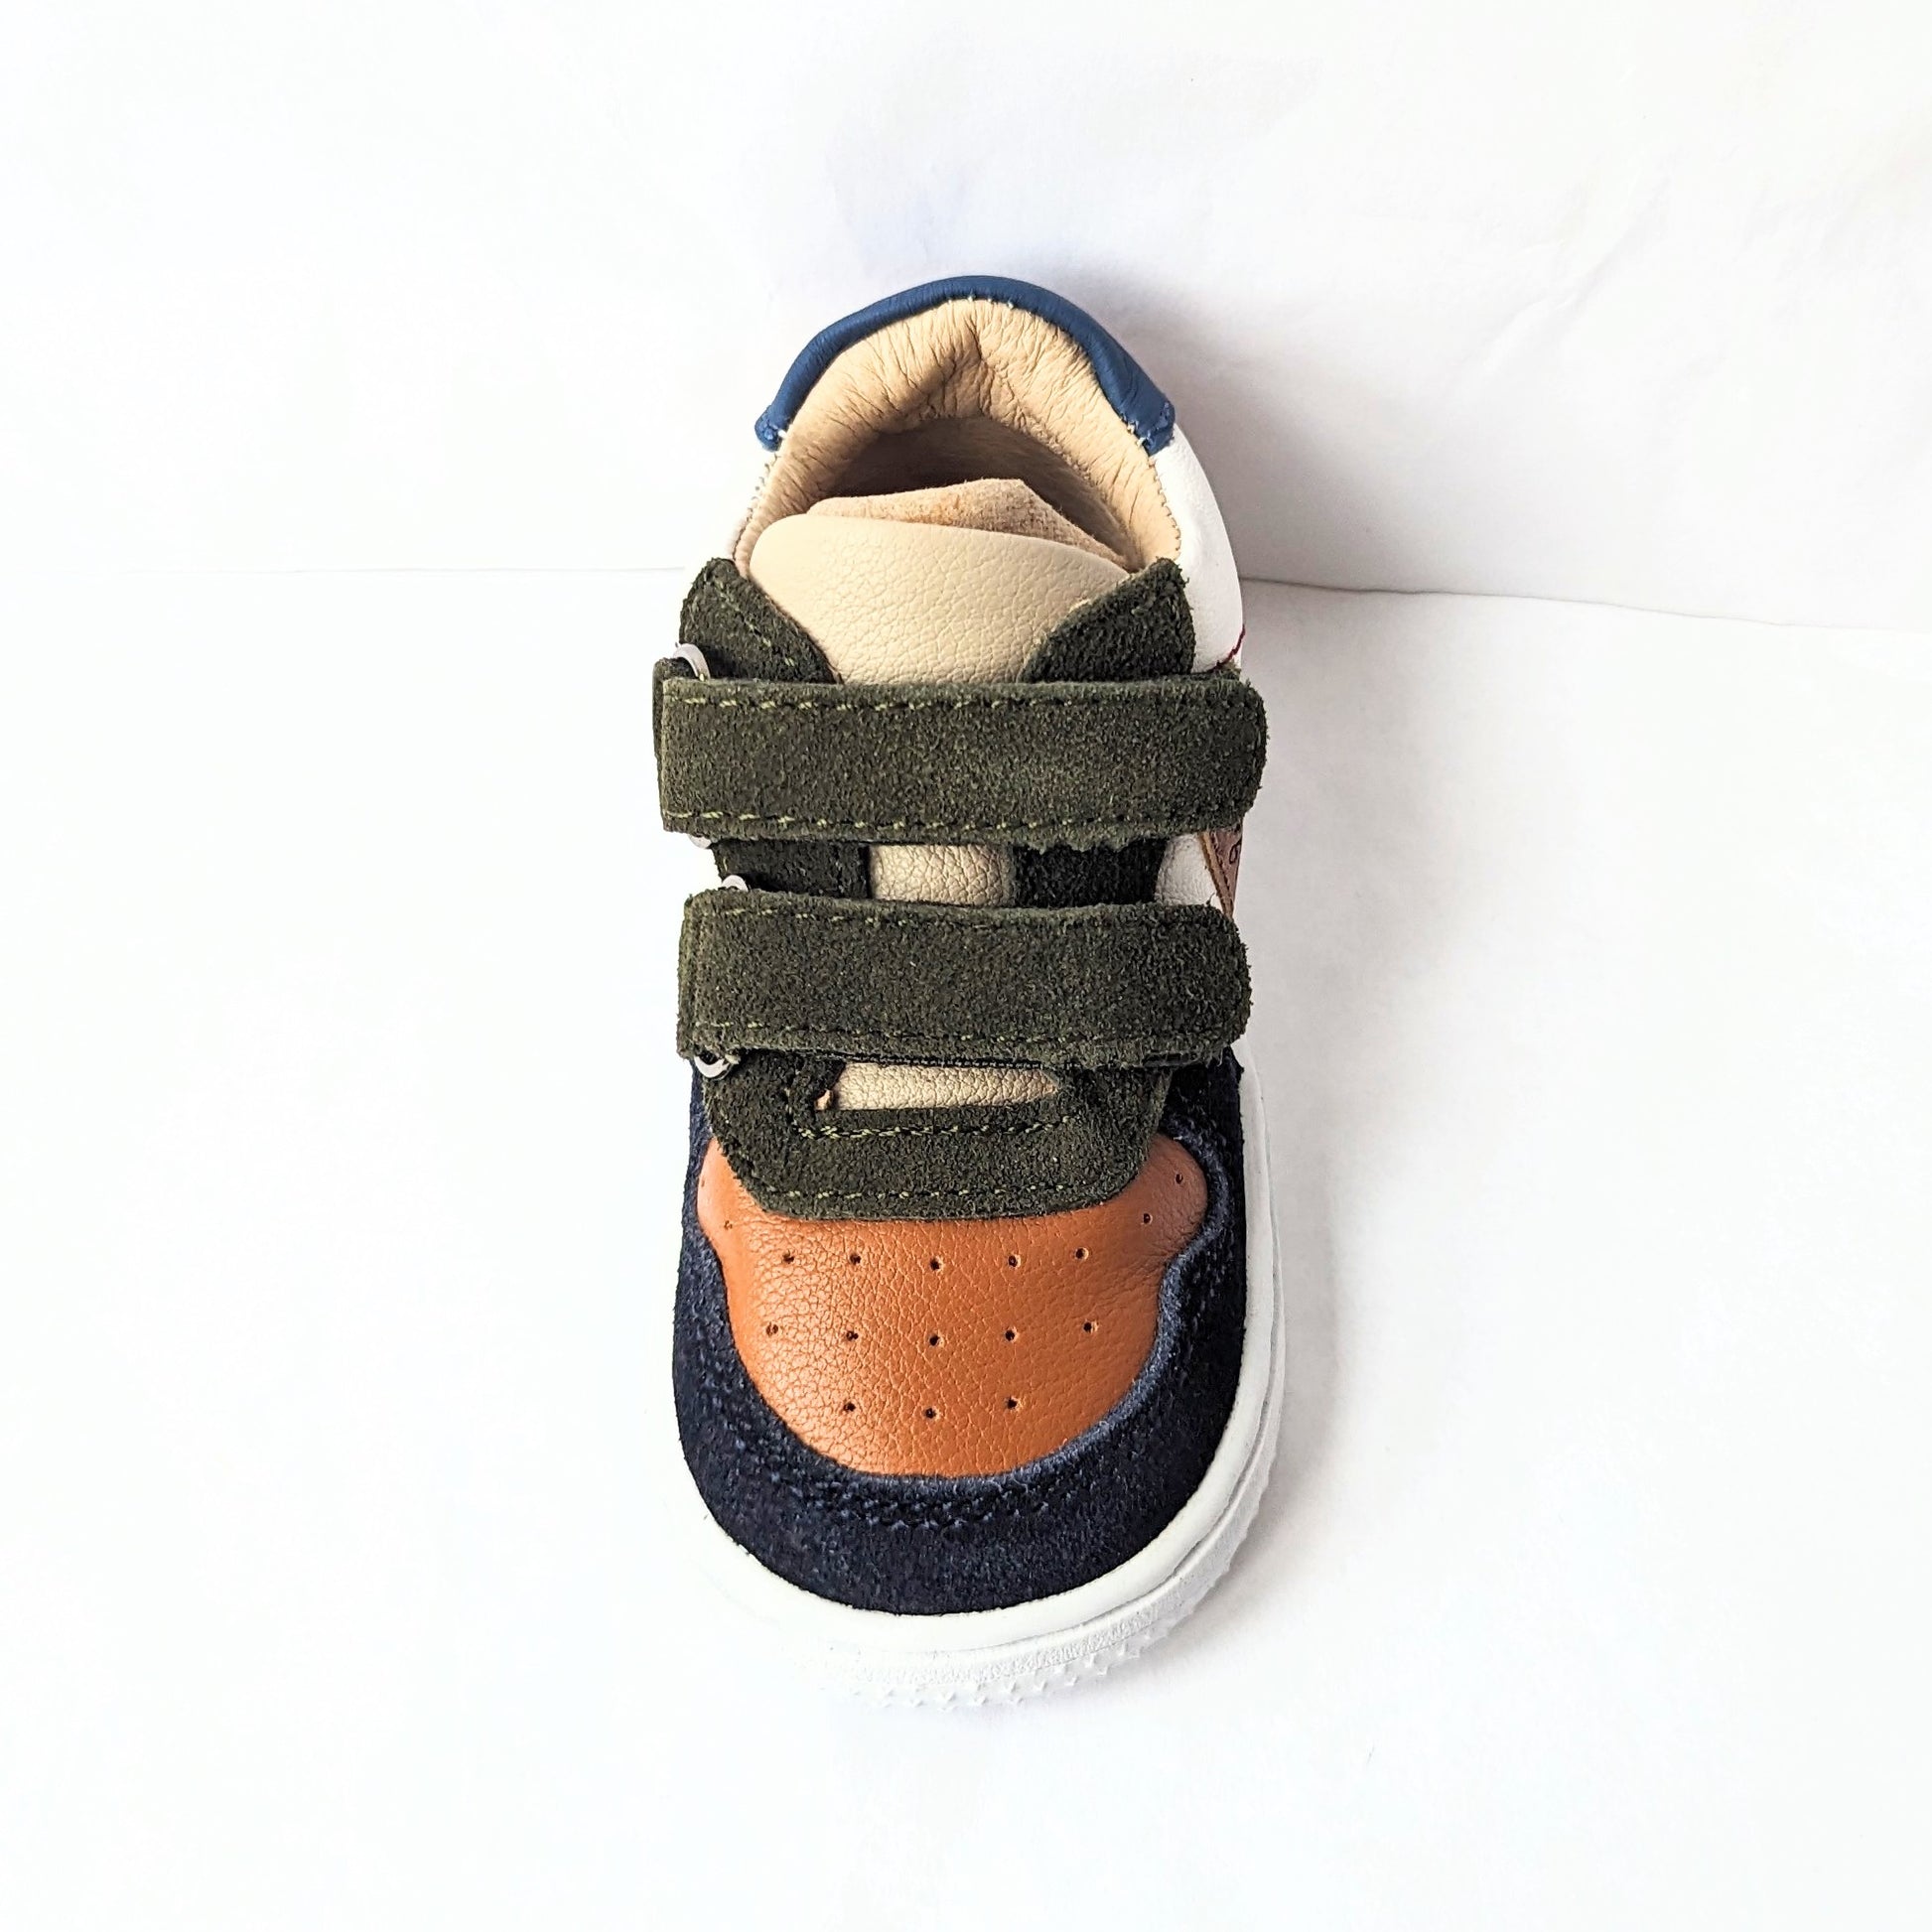 A boys trainer by Shoesme, style BN23W003-D, in white, green, tan and navy leather/nubuck with double velcro fastening. Front view.